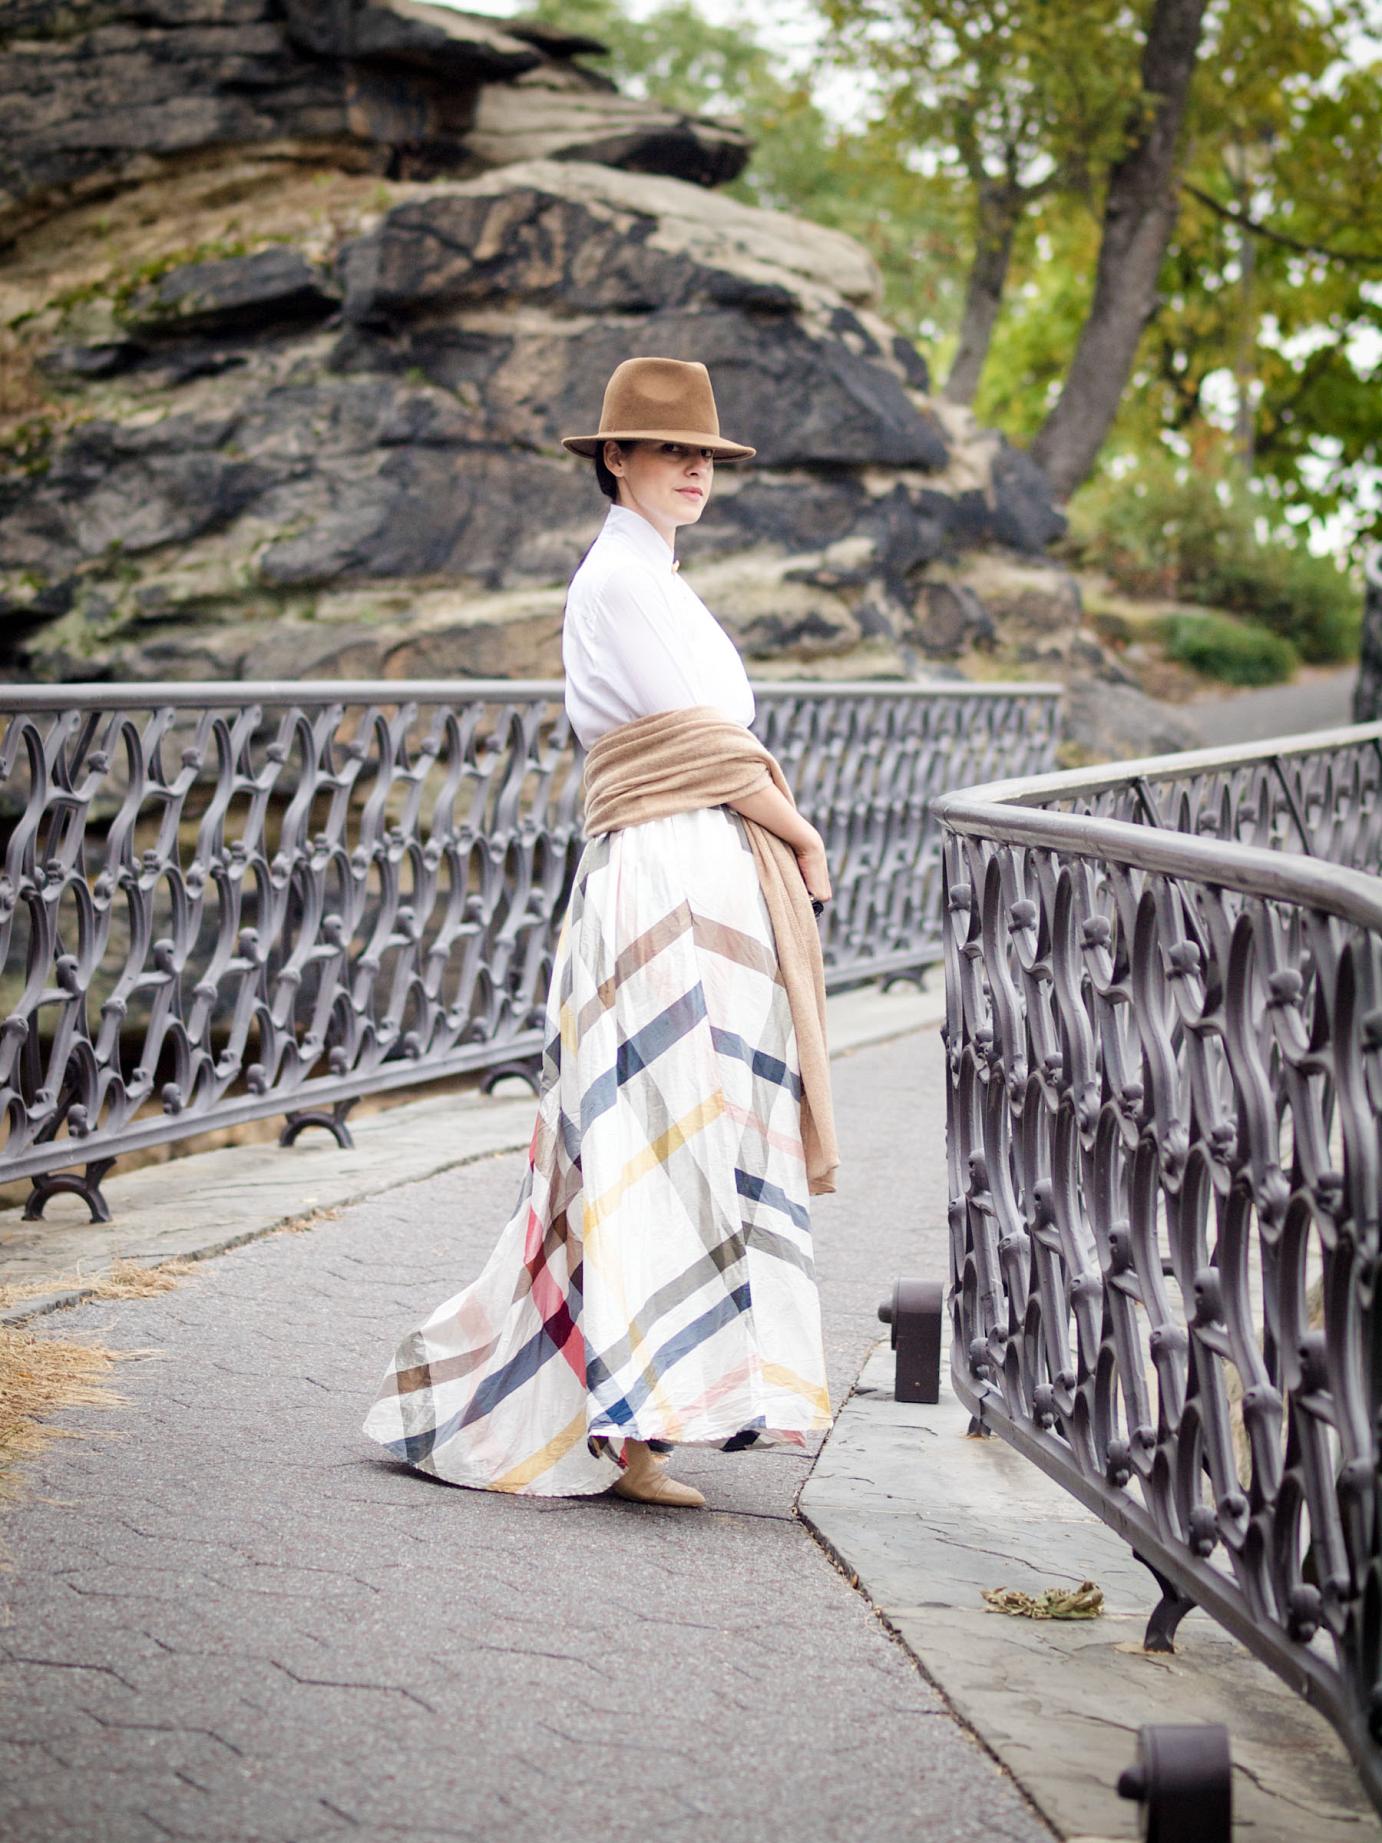 bittersweet colours, calypso st barth, Philadelphia, street style, fall trends, fall colors, maxi skirt, calvin klein fedora hat, white shirt, maternity style, baby bump, cashmere scarf, 